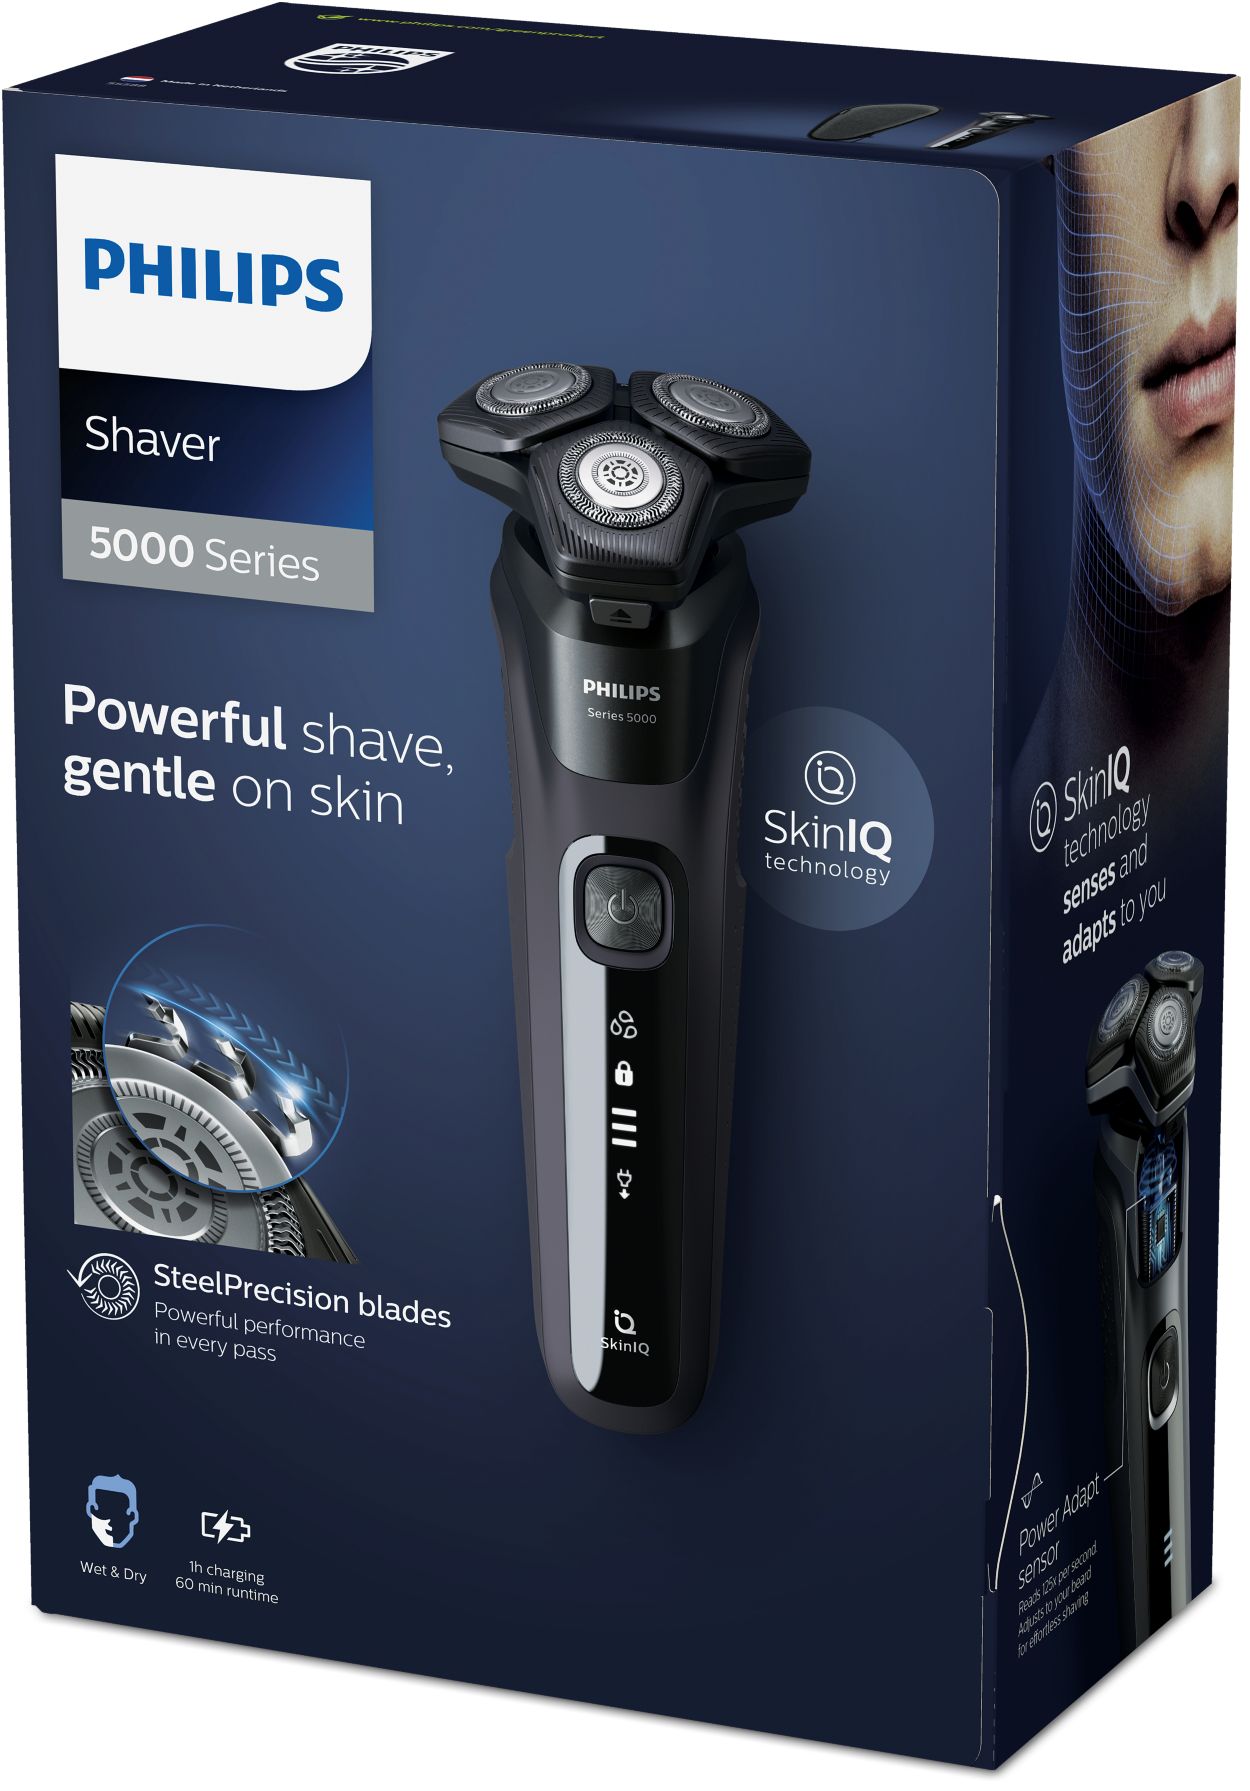 Shaver series 5000 Wet & Dry electric shaver S5588/30 | Philips